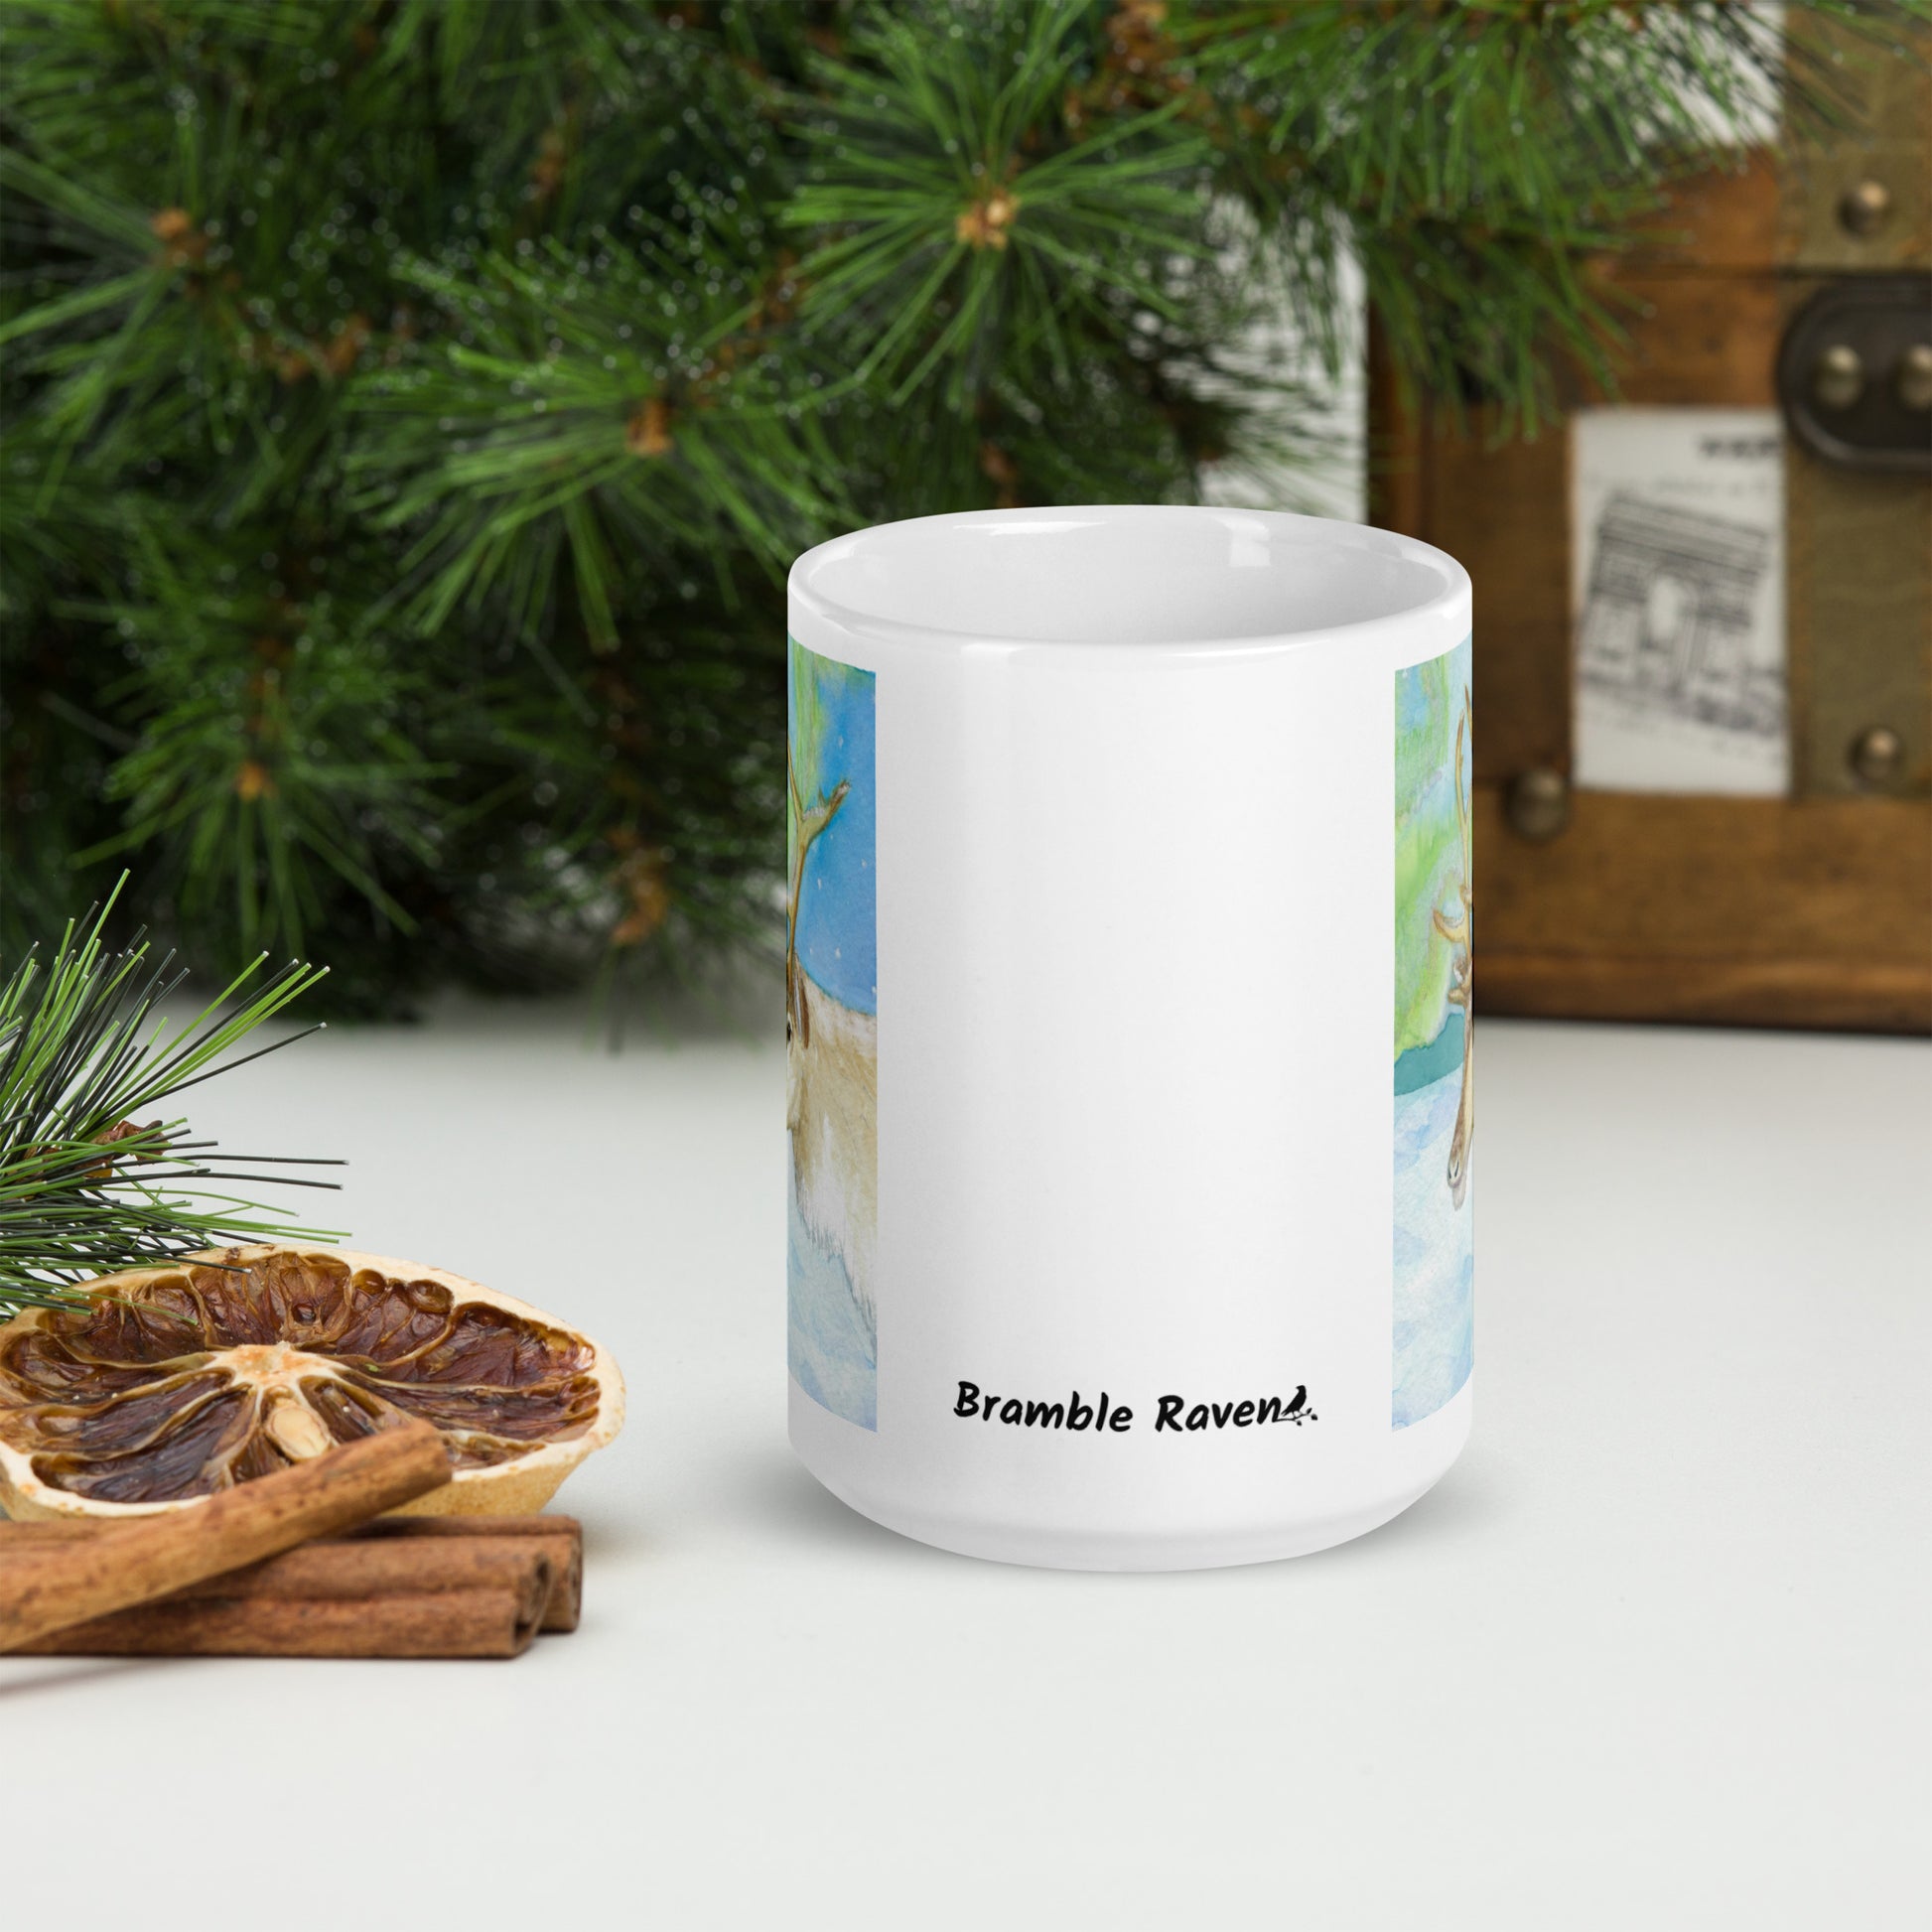 15 ounce ceramic mug featuring Northern Lights reindeer design. Double-sided print. Dishwasher and microwave safe. Front view shows Bramble Raven logo. Shown by dried citrus slices and pine boughs.